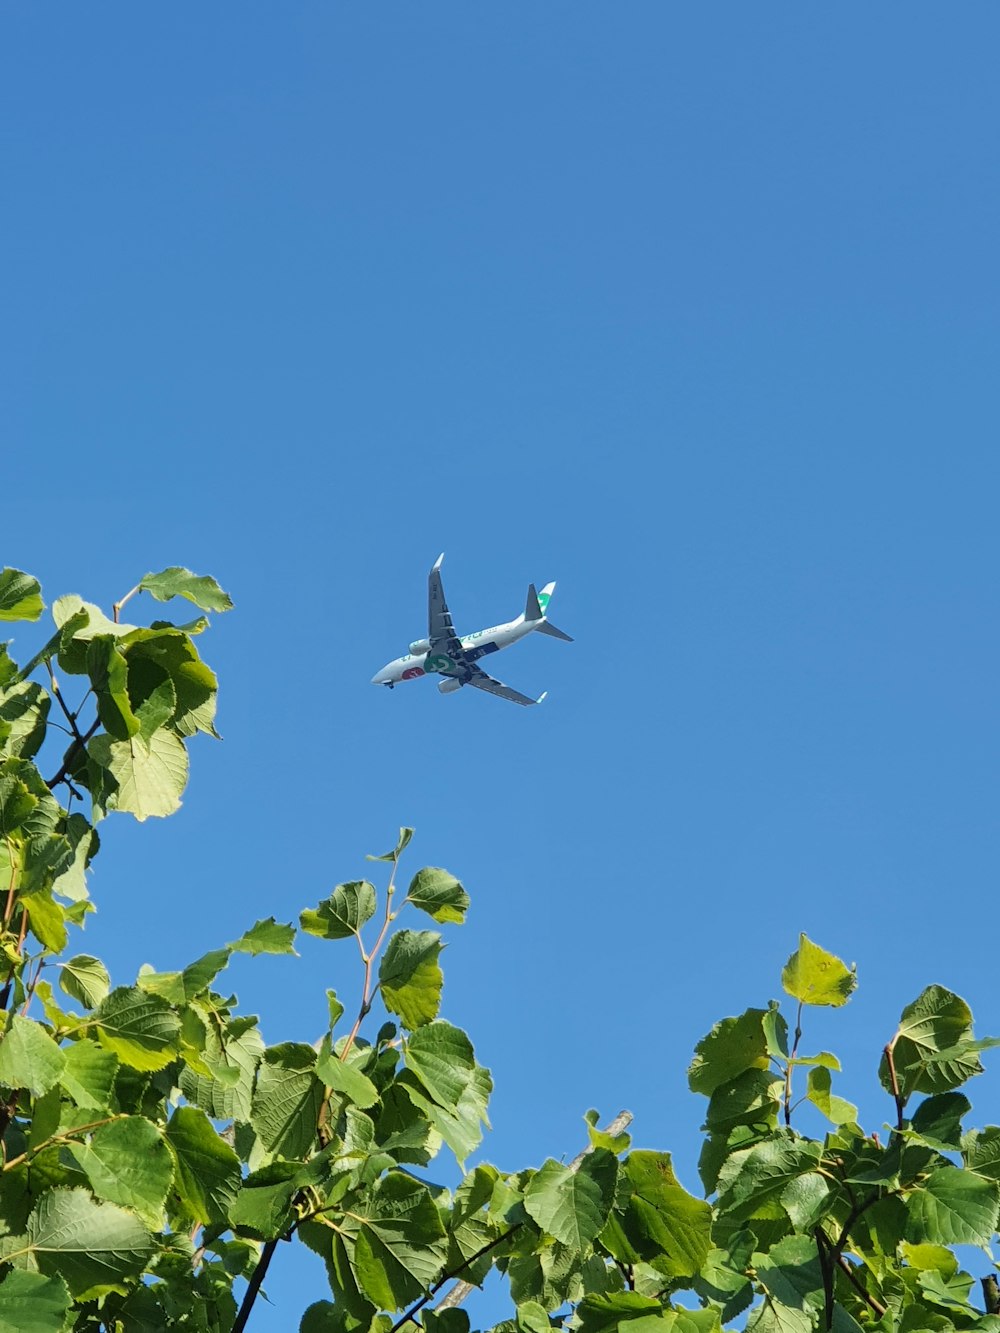 white and black airplane flying over green leaves during daytime